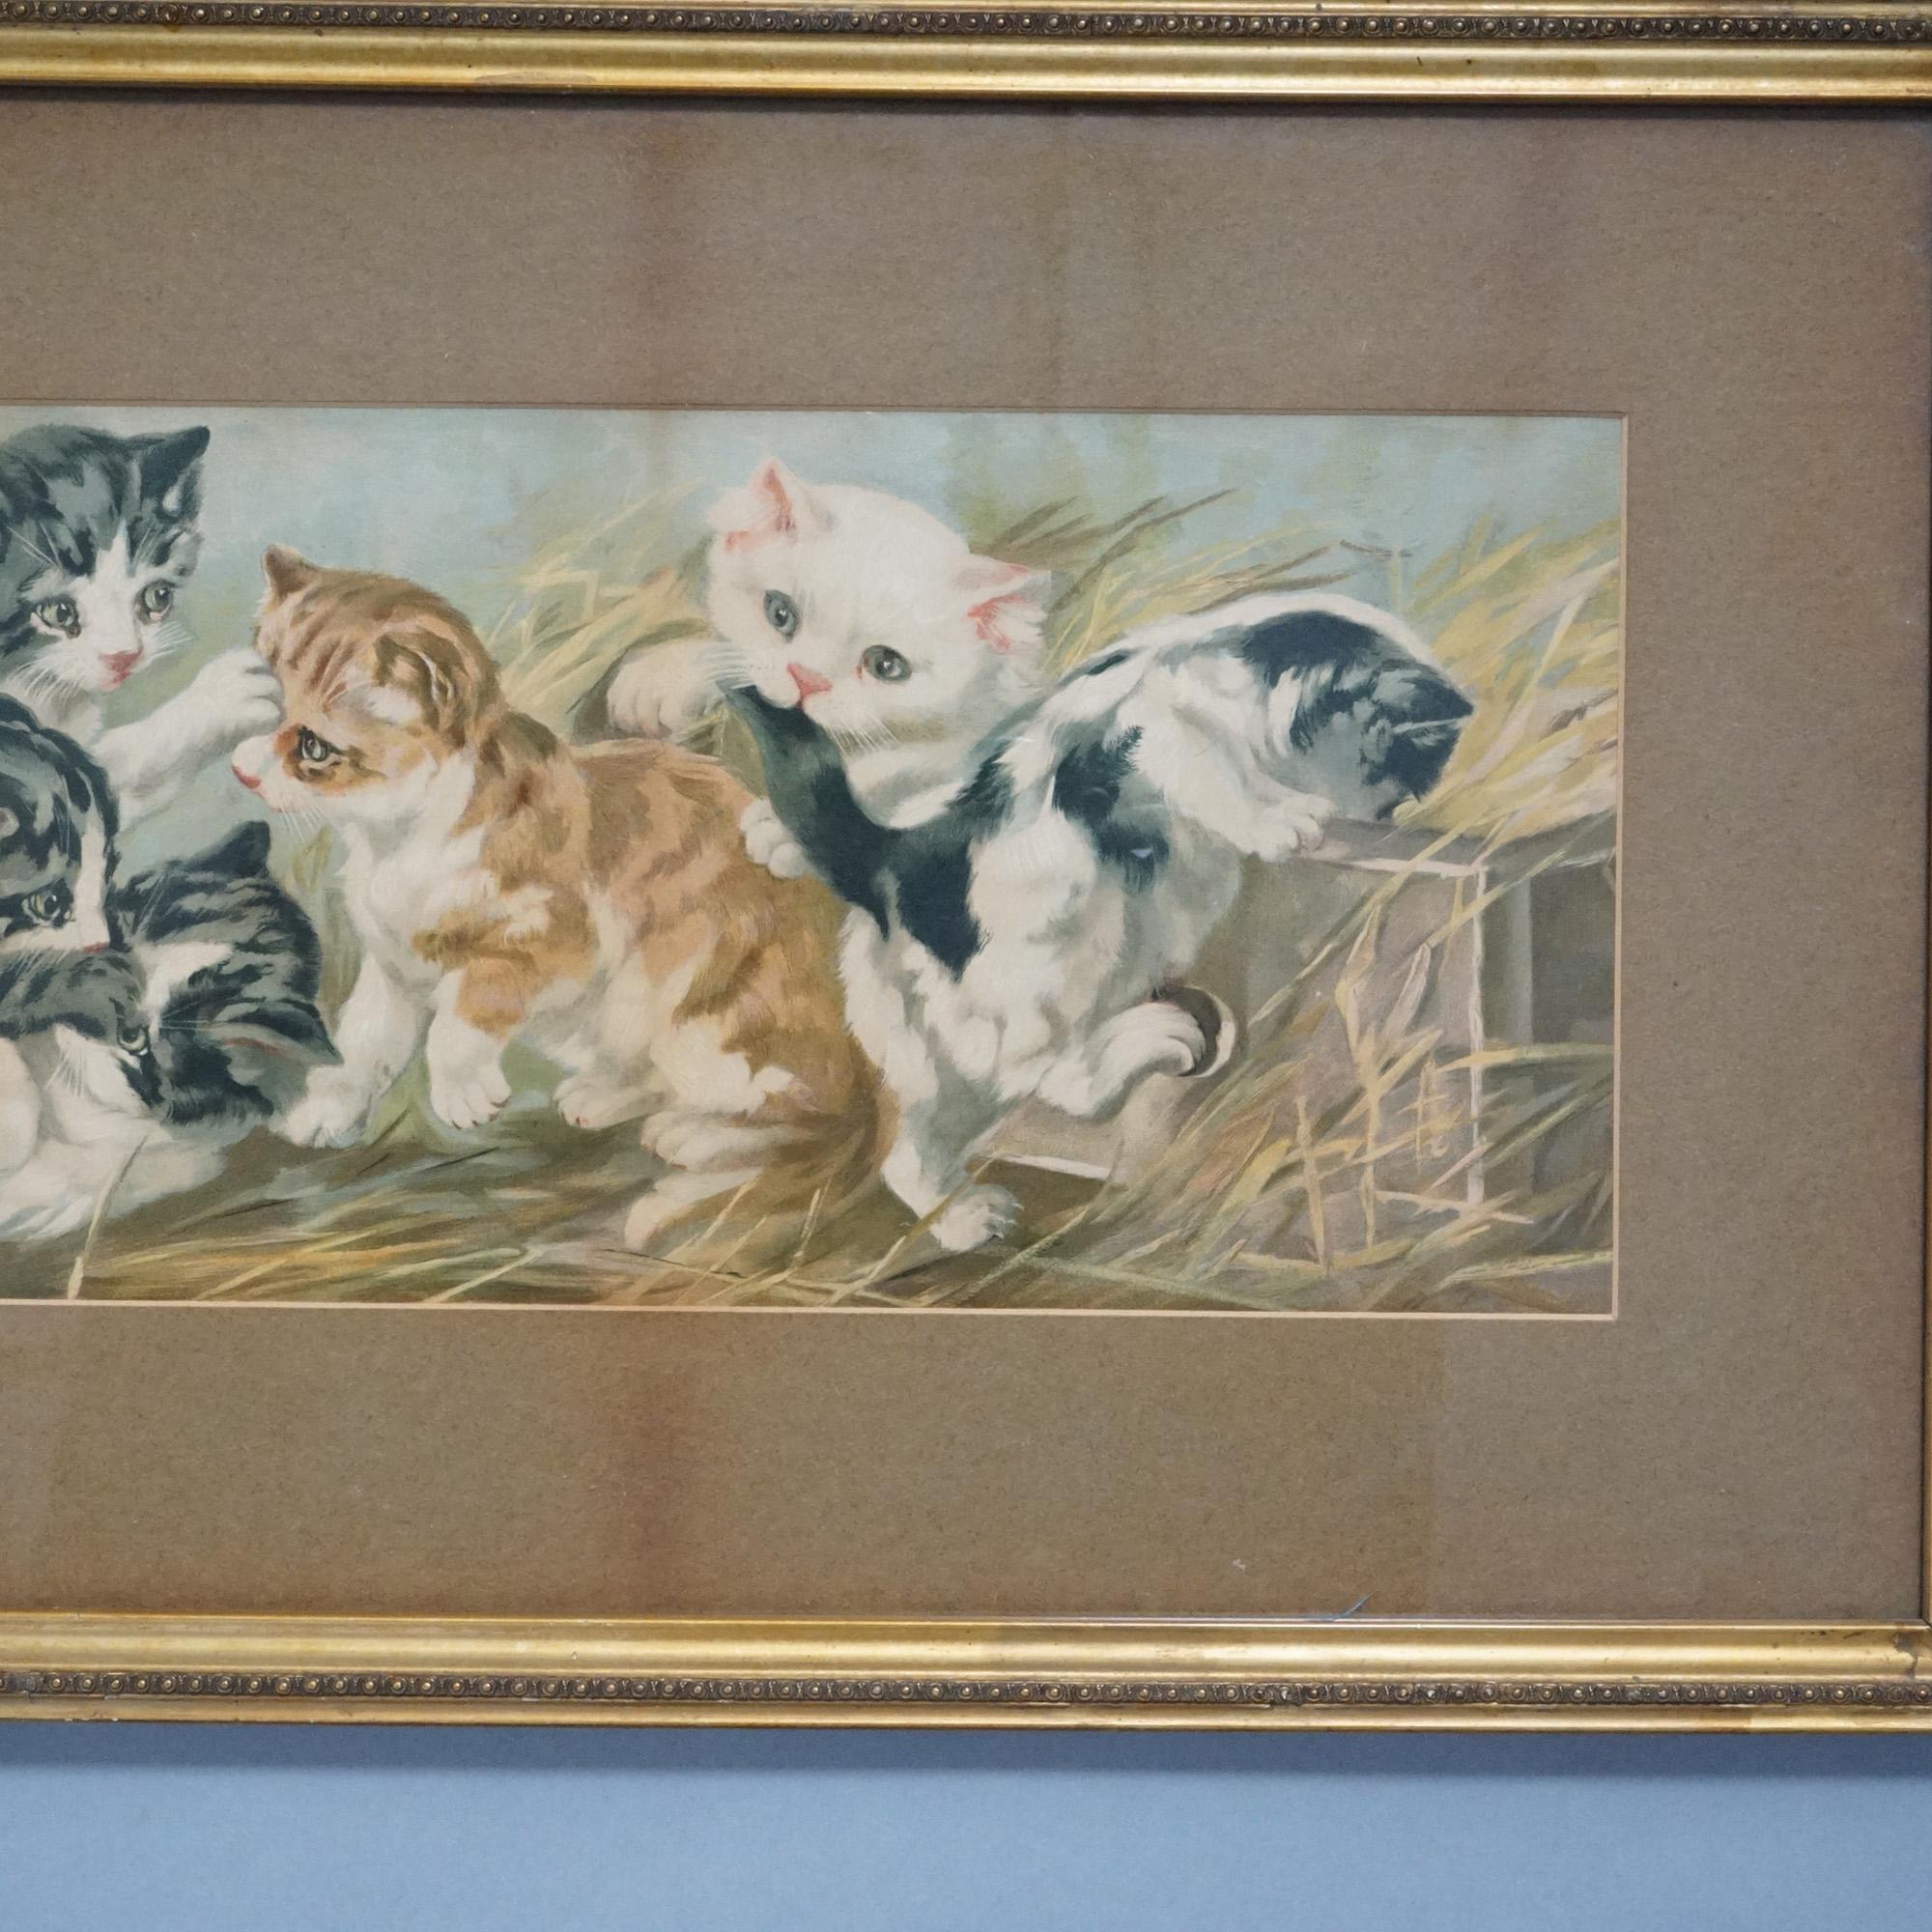 An antique Victorian yard-long print of playful kittens seated in giltwood frame, c1900

Measures- 16'' H x 41.5'' W x 1.25'' D.